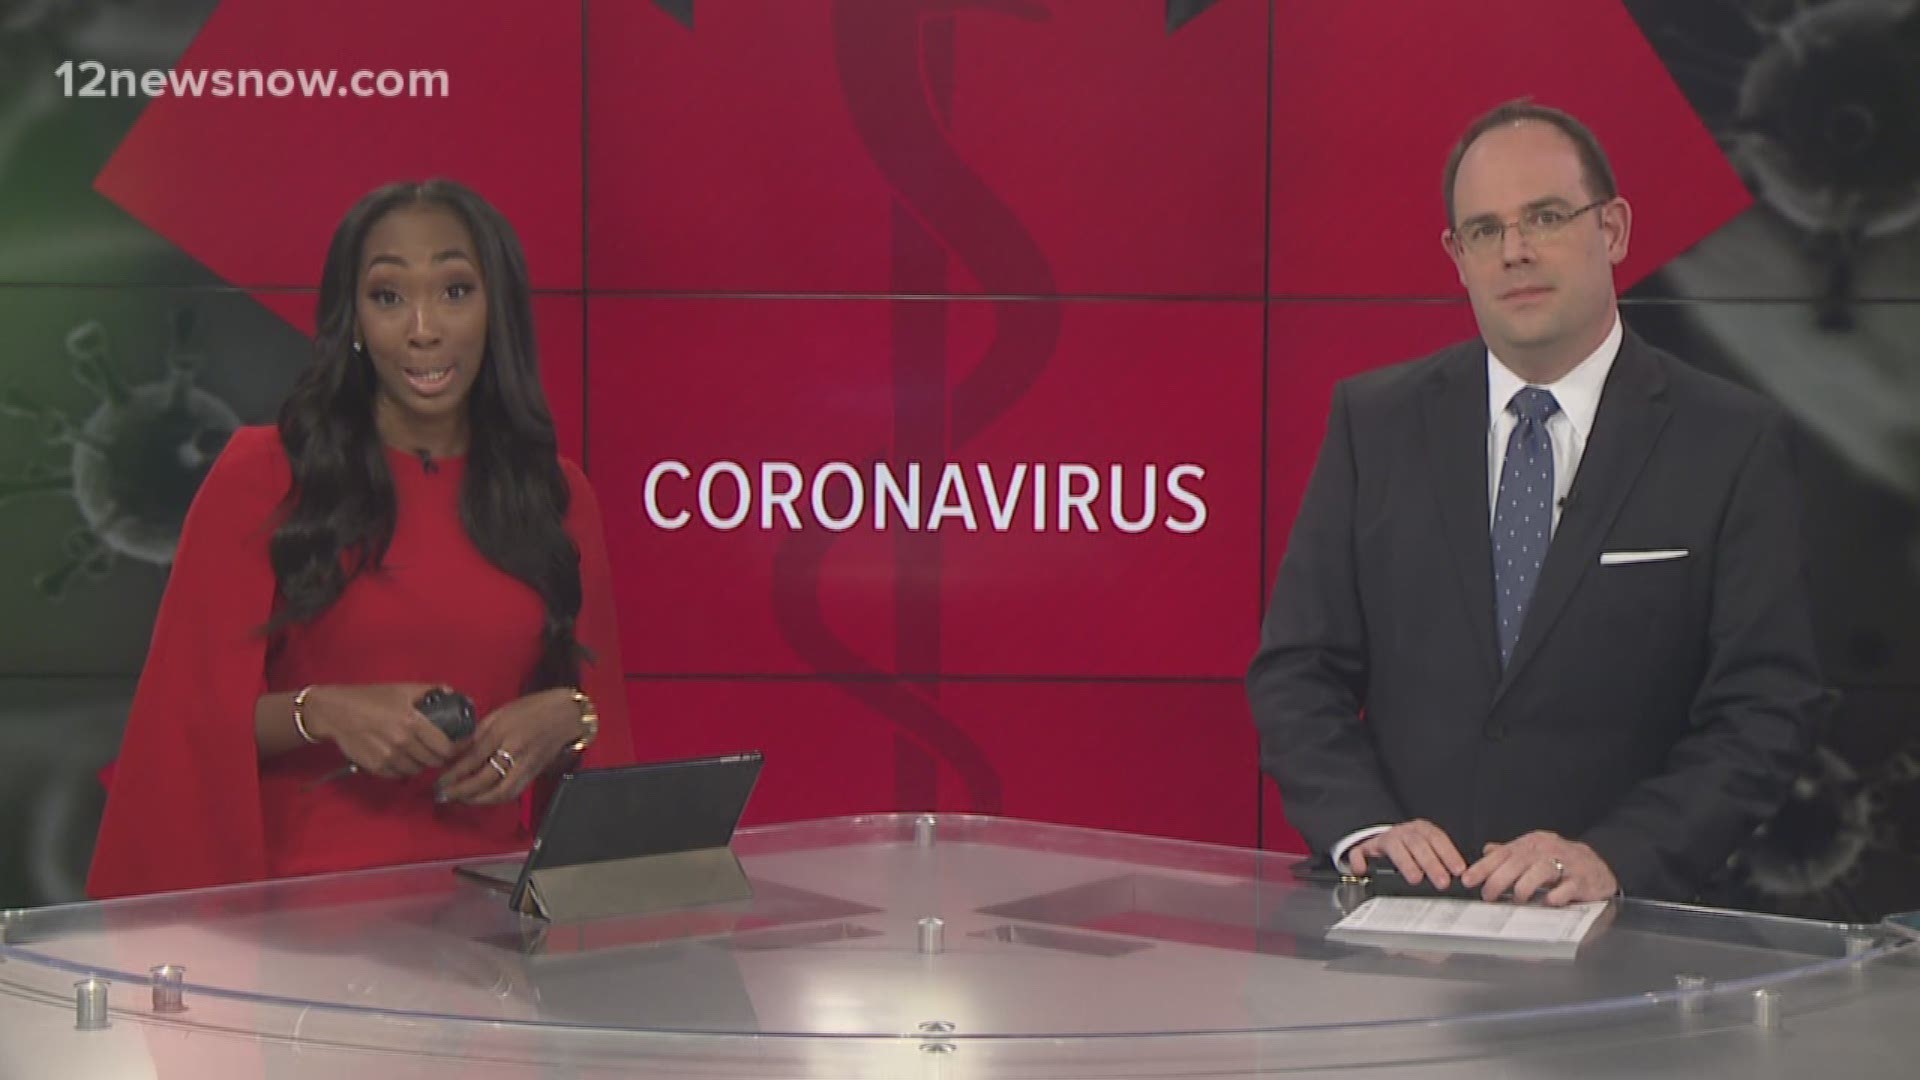 12News took a look inside the hospital to see how the procedure would look if someone came in with symptoms associated with the Coronavirus.